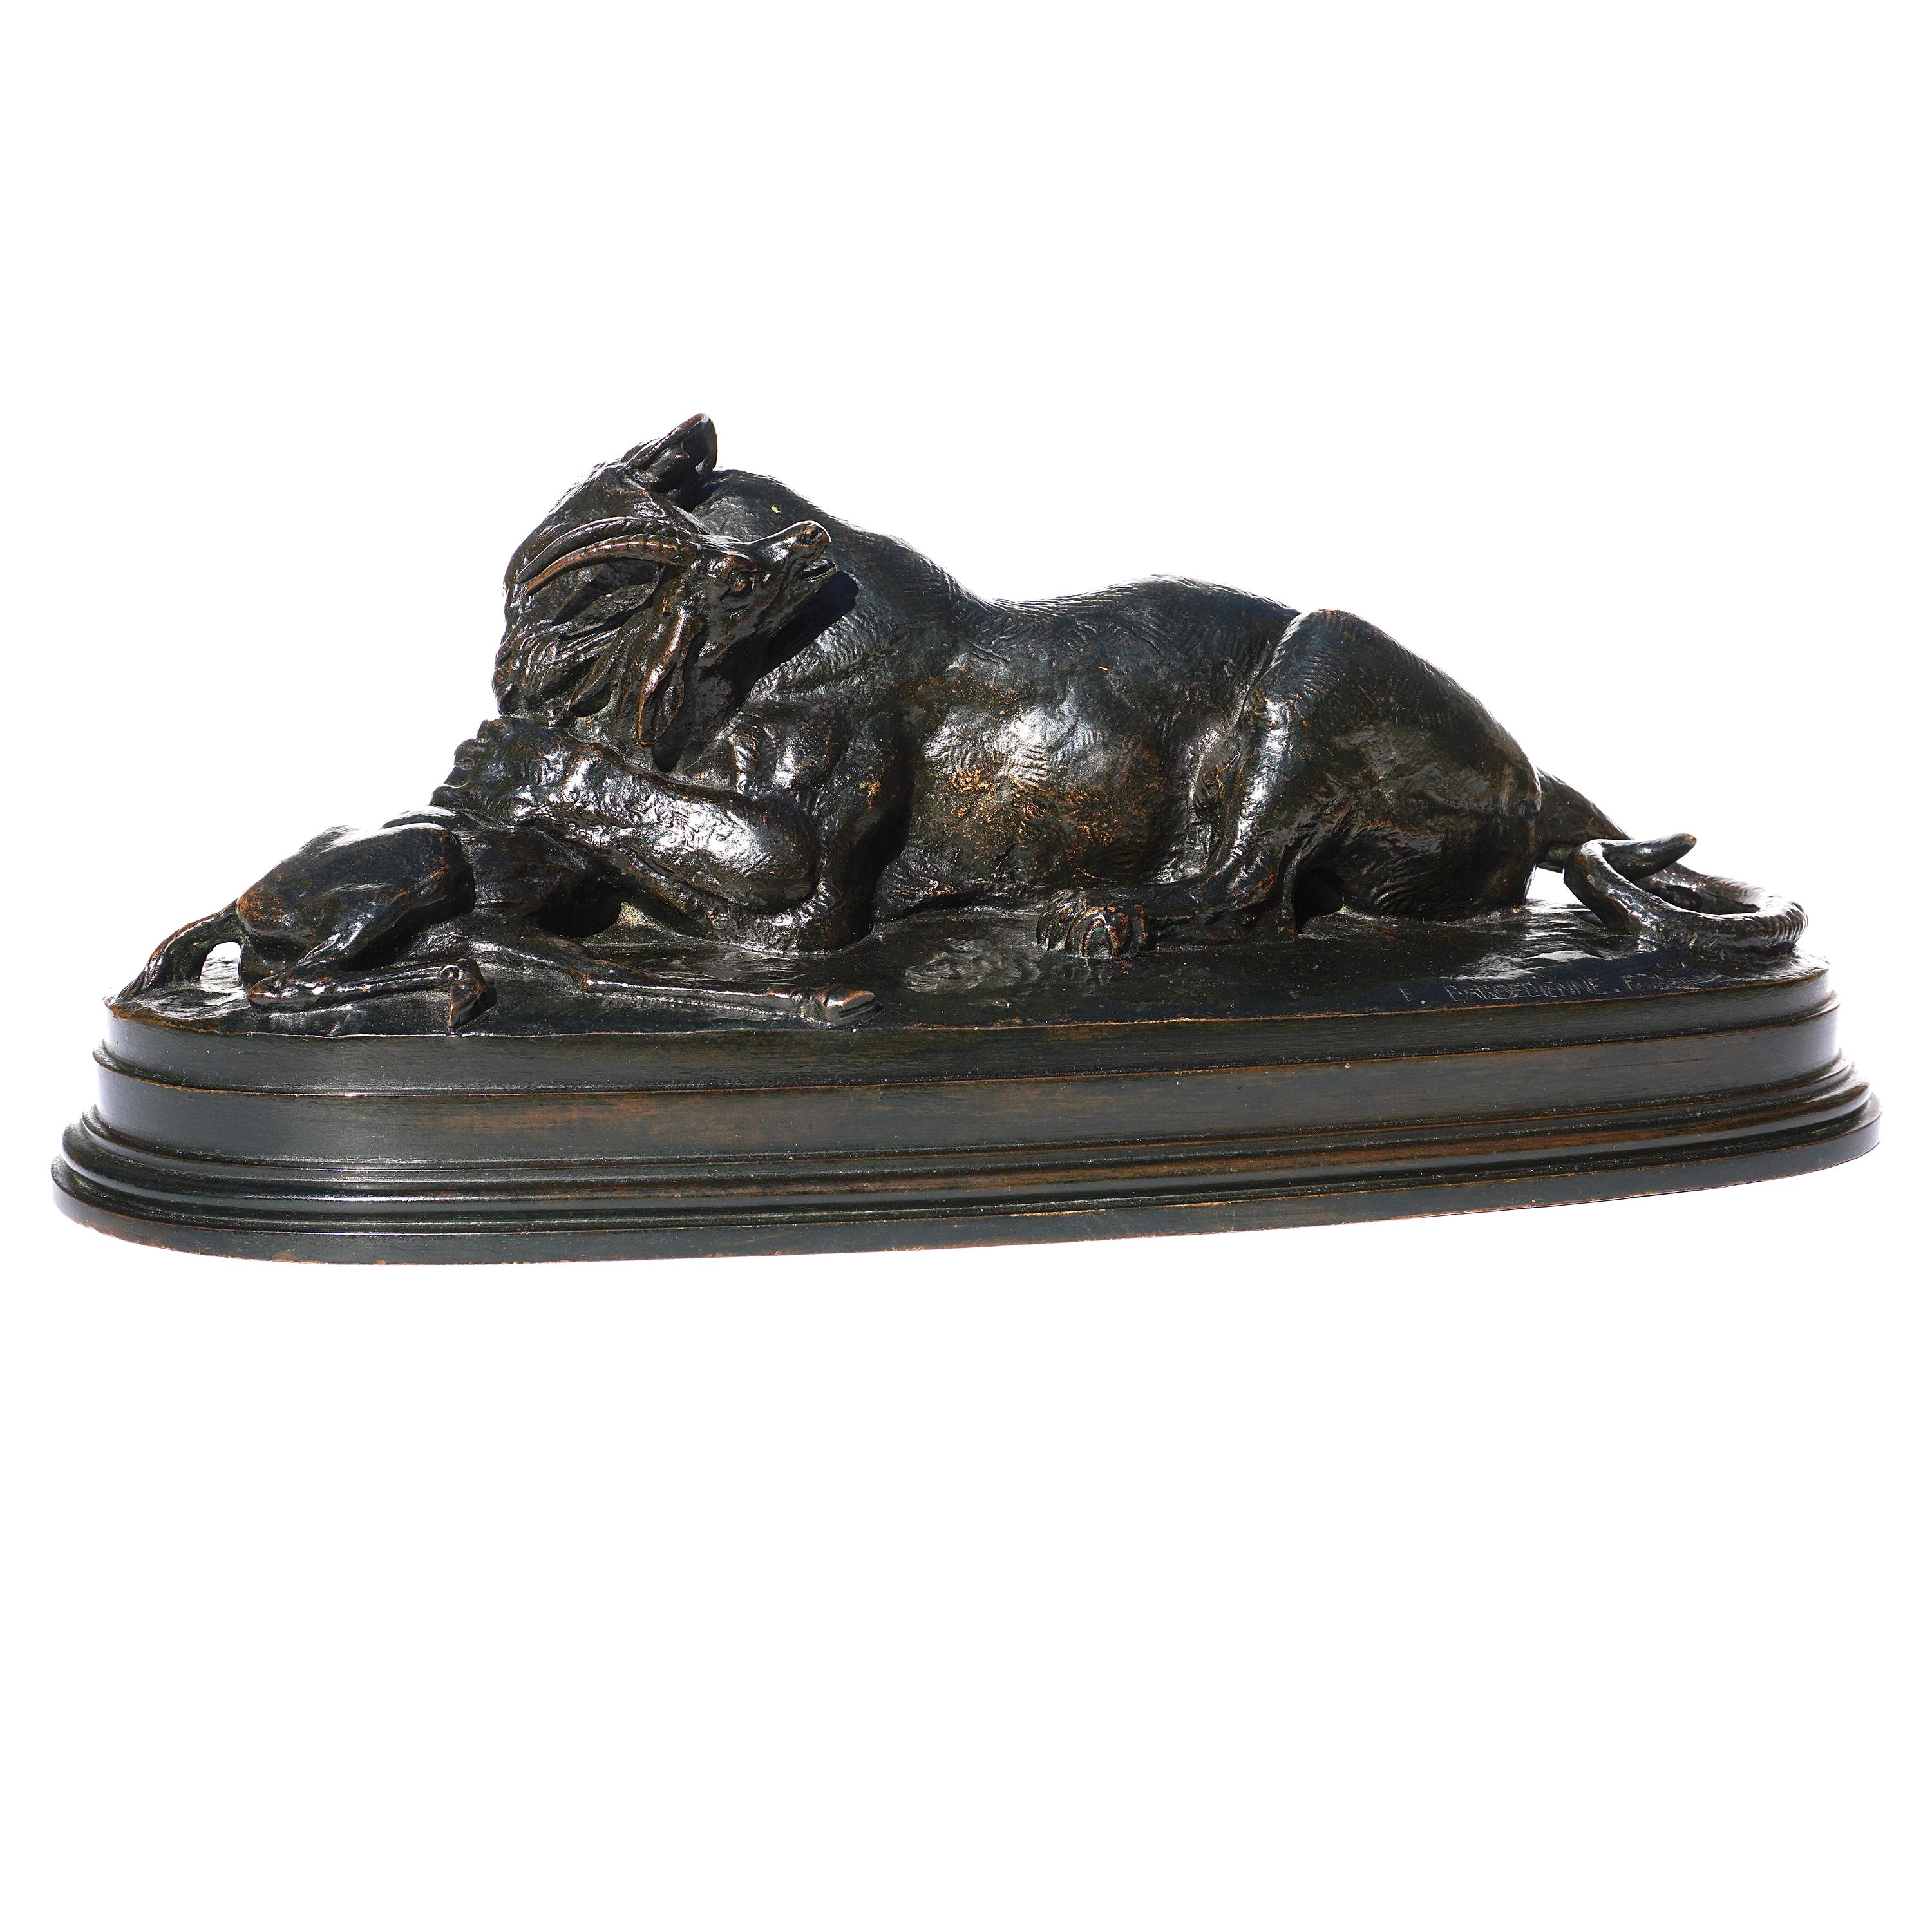 1831 French Museum Art Tigre dévorant un gavial Tiger Devouring a Gavial by Antoine-Louis Barye Marble -PLA 3D Print Tabletop Statue